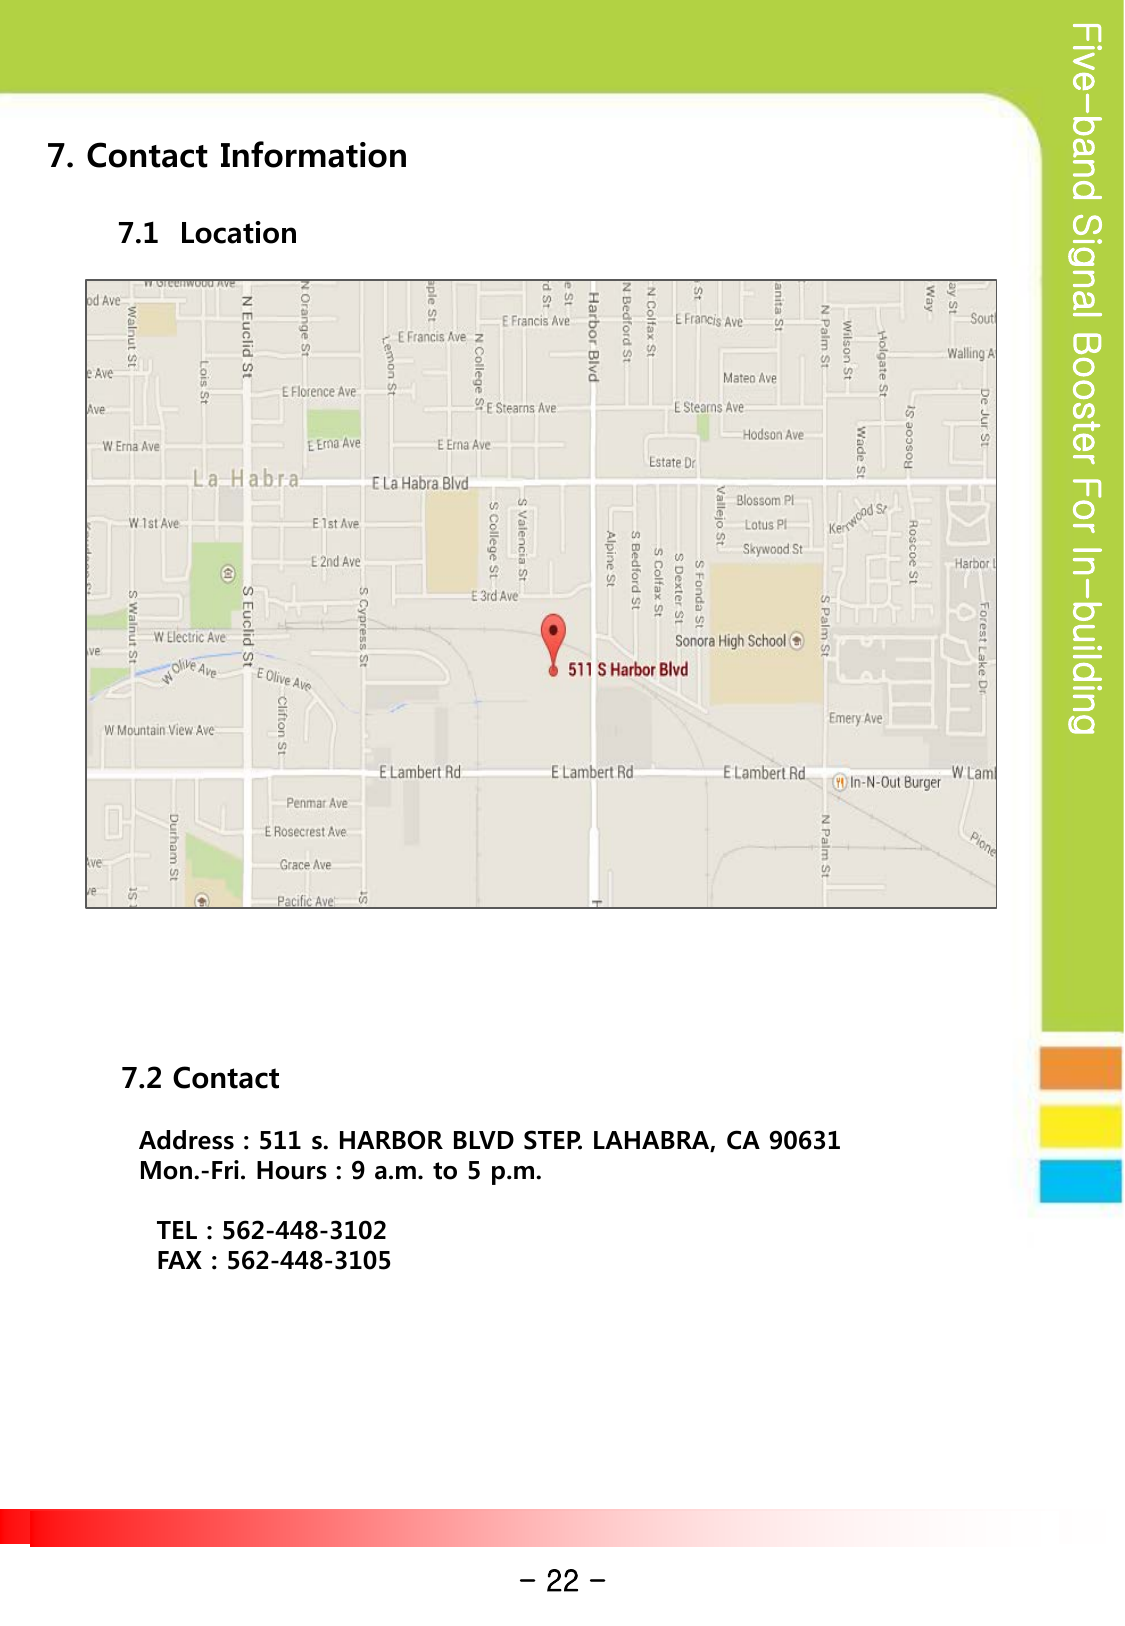 Five-band Signal Booster For In-building 7. Contact Information         7.1  Location                      7.2 Contact     Address : 511 s. HARBOR BLVD STEP. LAHABRA, CA 90631   Mon.-Fri. Hours : 9 a.m. to 5 p.m.      TEL : 562-448-3102     FAX : 562-448-3105 - 22 - 